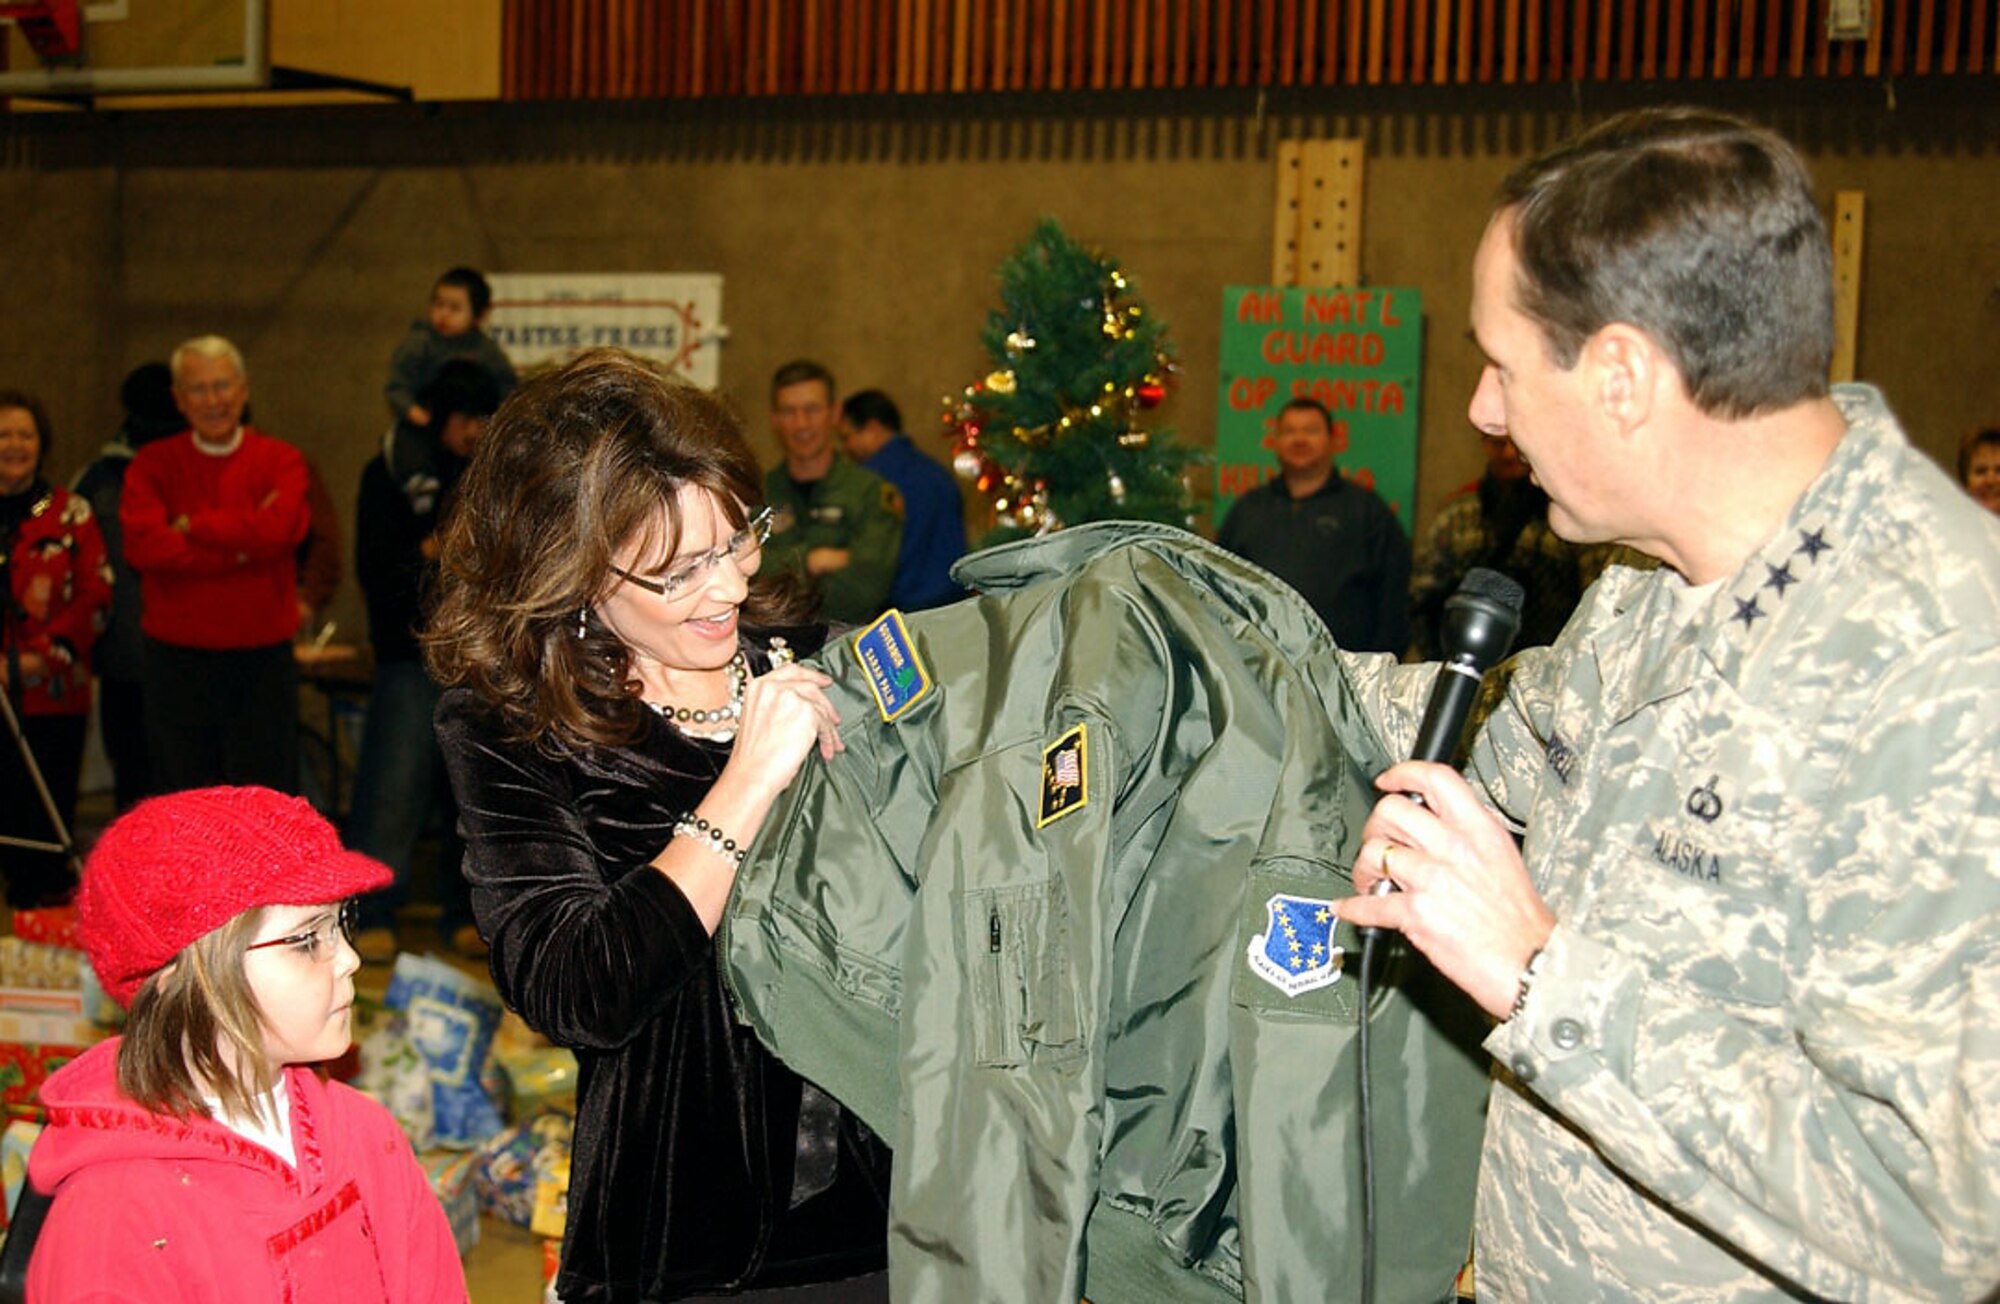 Alaska Gov. Sarah Palin receives a flight jacket from Lt. Gen. Craig E. Campbell as a token of thanks for supporting the Alaska National Guard during Operation Santa Claus 2008 on Dec. 6 in Kivalina, Alaska. Operation Santa Claus, an Alaska National Guard community relations and support program, provides toys, books and school supplies for young people in communities across the state. General Campbell is Alaska's adjutant general. (U.S. Army photo/Spc. Paizley Ramsey)